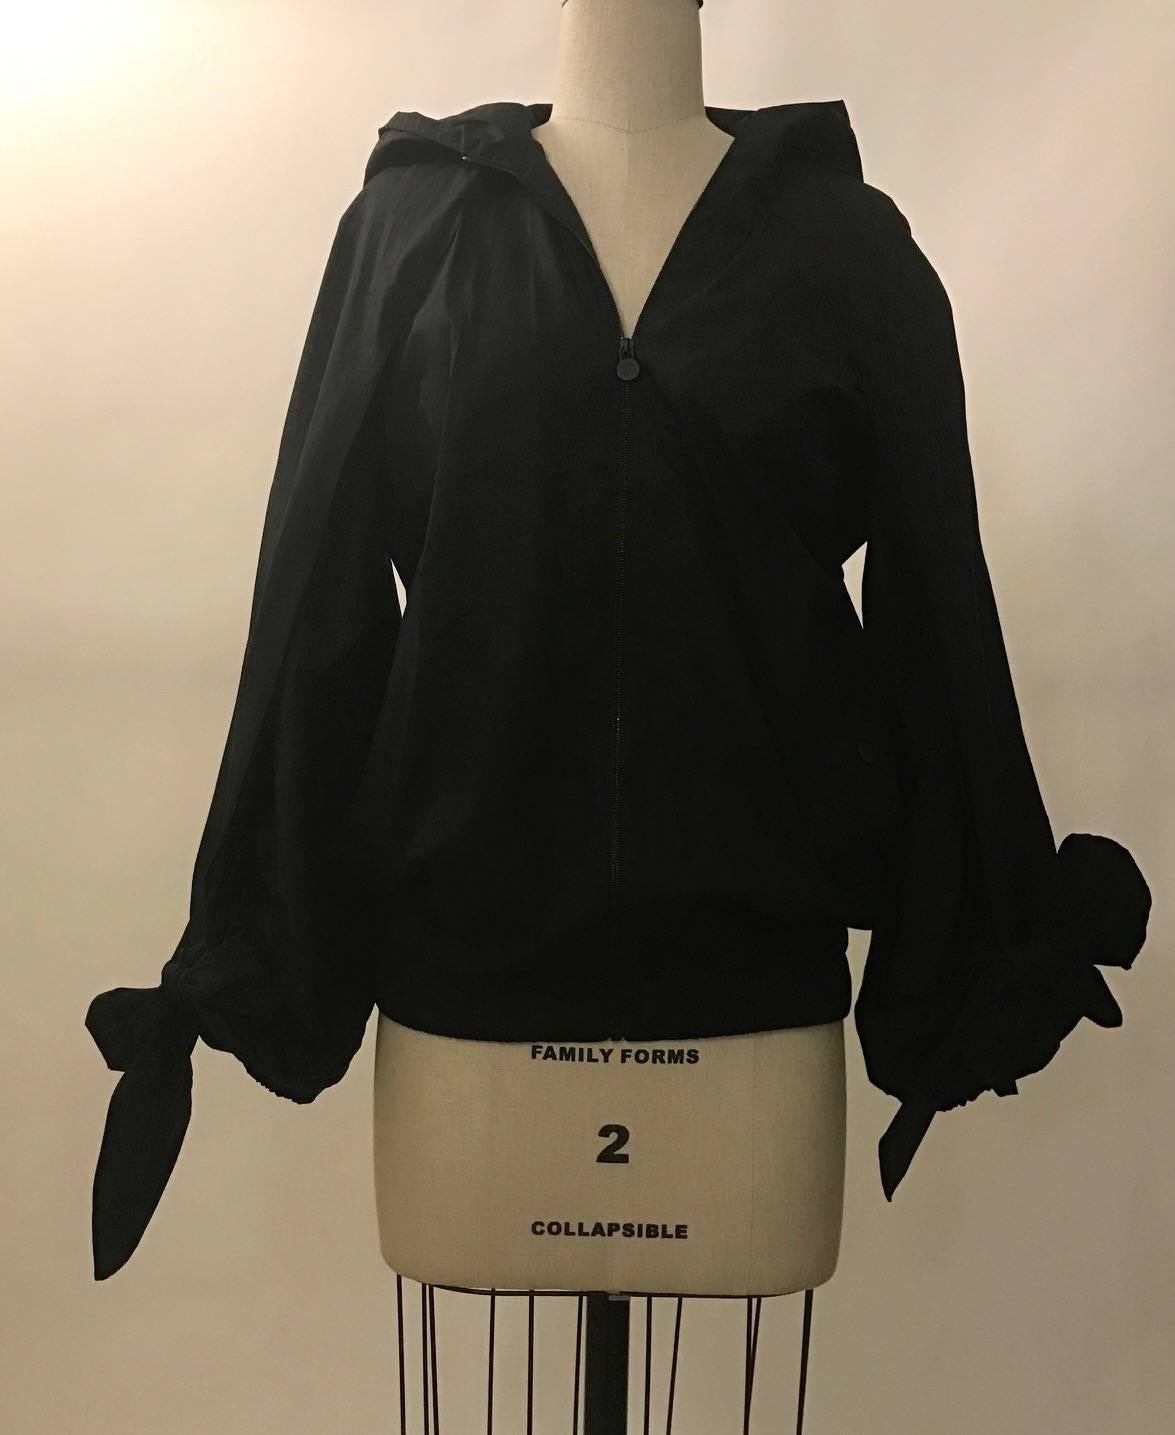 Chanel black windbreaker with slit balloon sleeves finished with ties at bottom and super long detachable scarf that can be tied in a bow, wrapped, or left hanging. Hooded, zip front and snap pockets feature CC logo.

Cruise/resort 2015 runway look